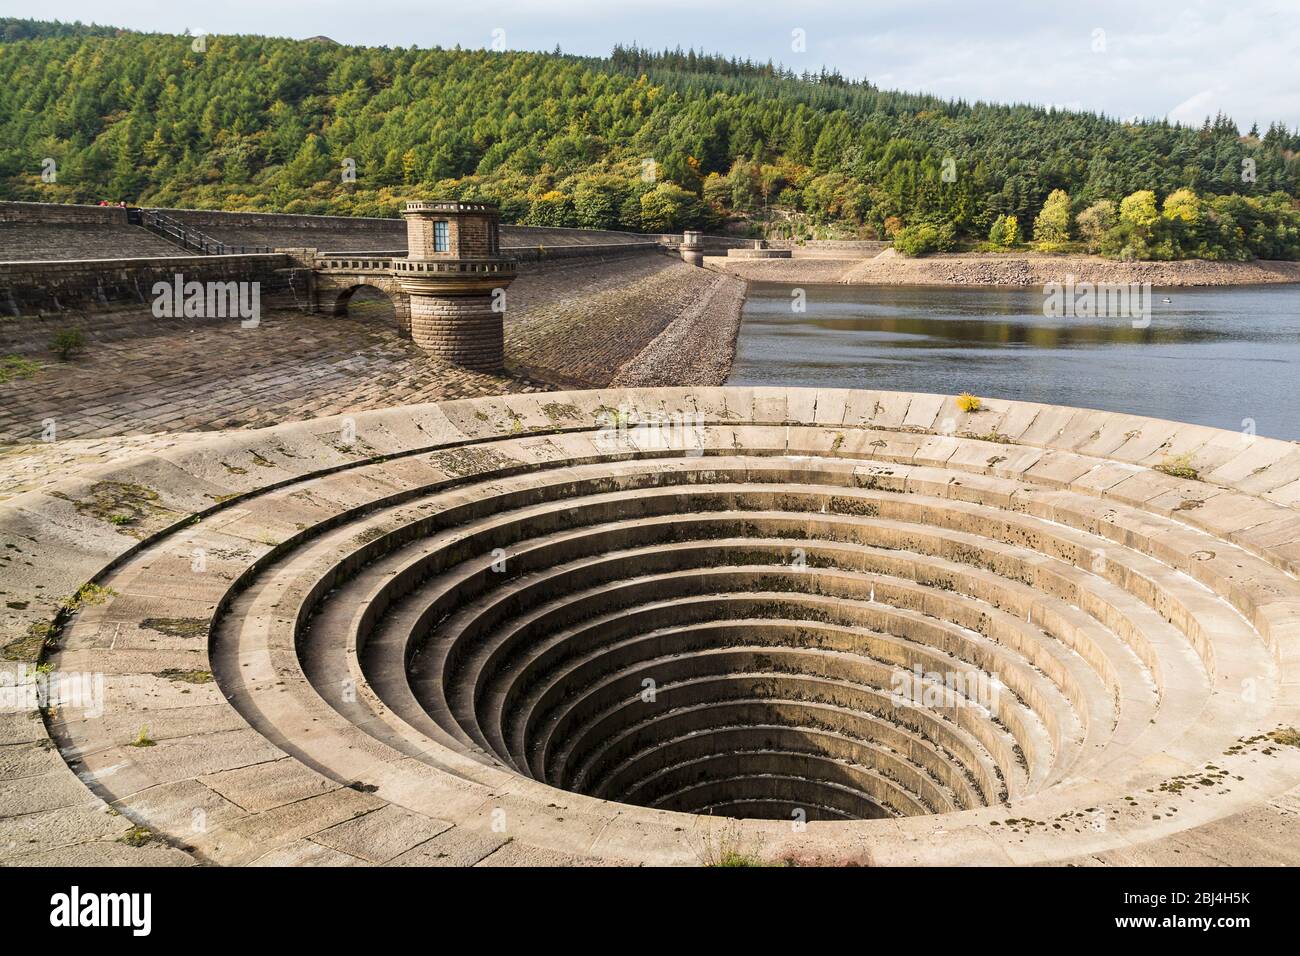 Ladybower Dam at the South side of the Ladybower Reservoir. Stock Photo